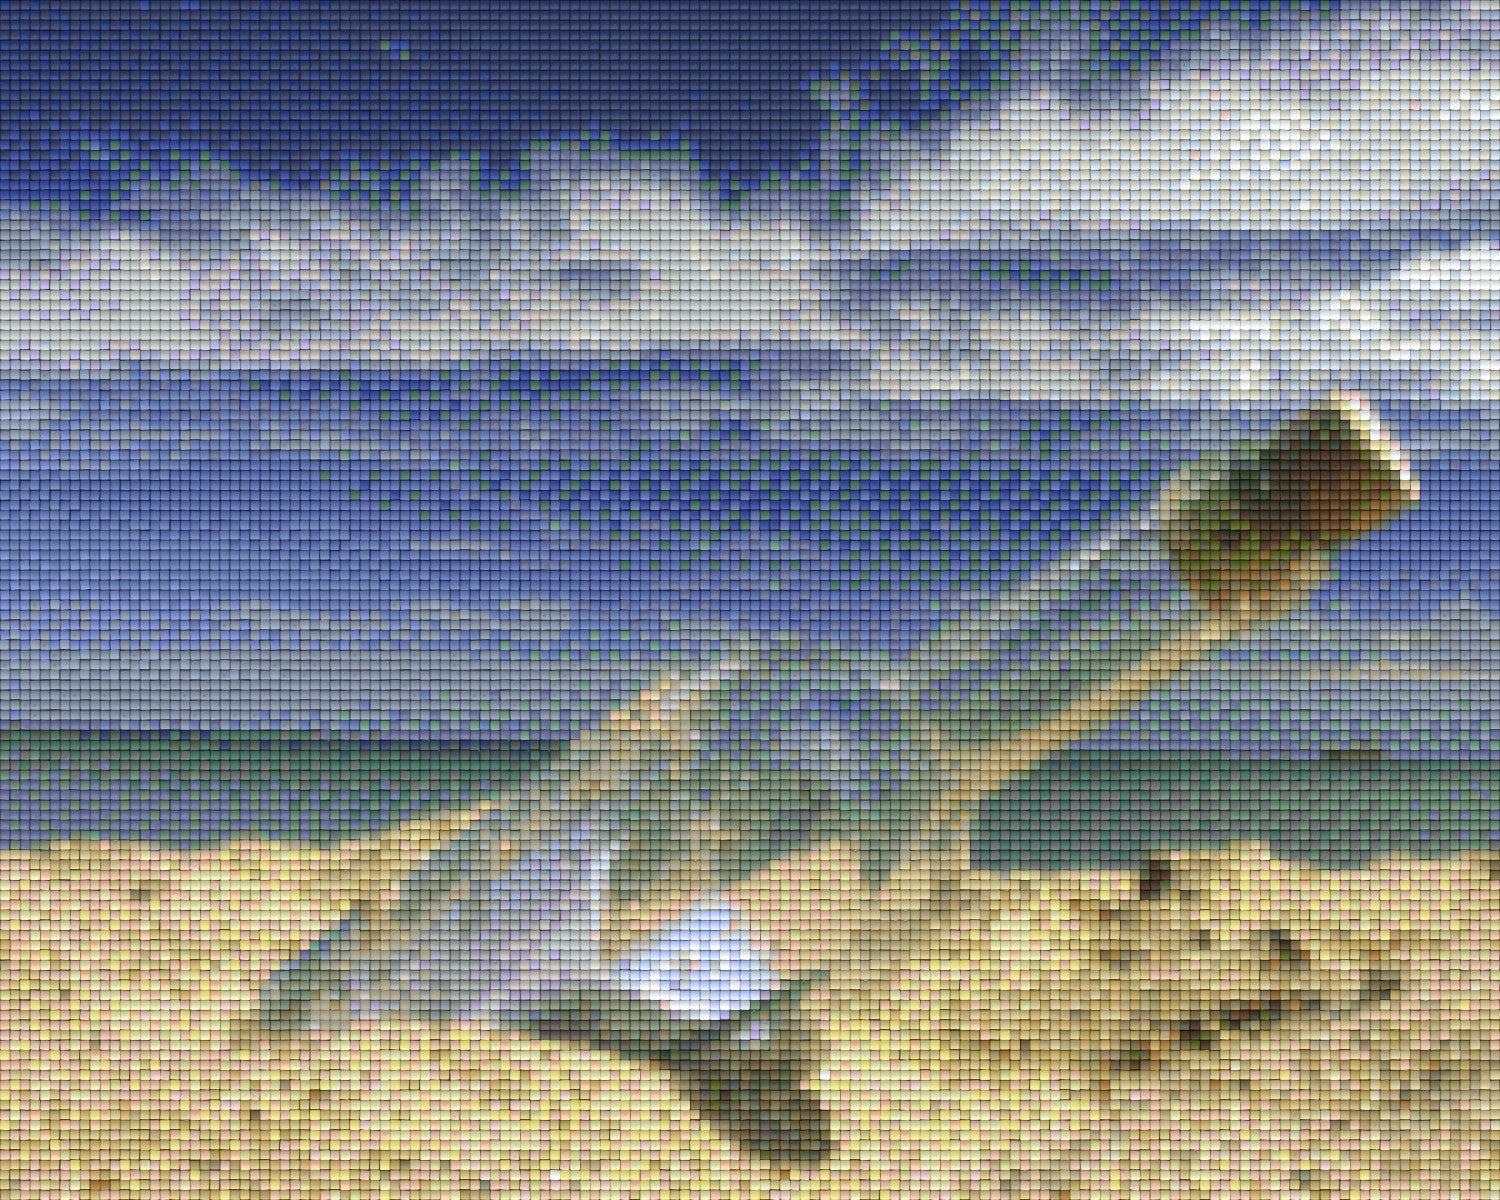 Pixel hobby classic set - message in a bottle